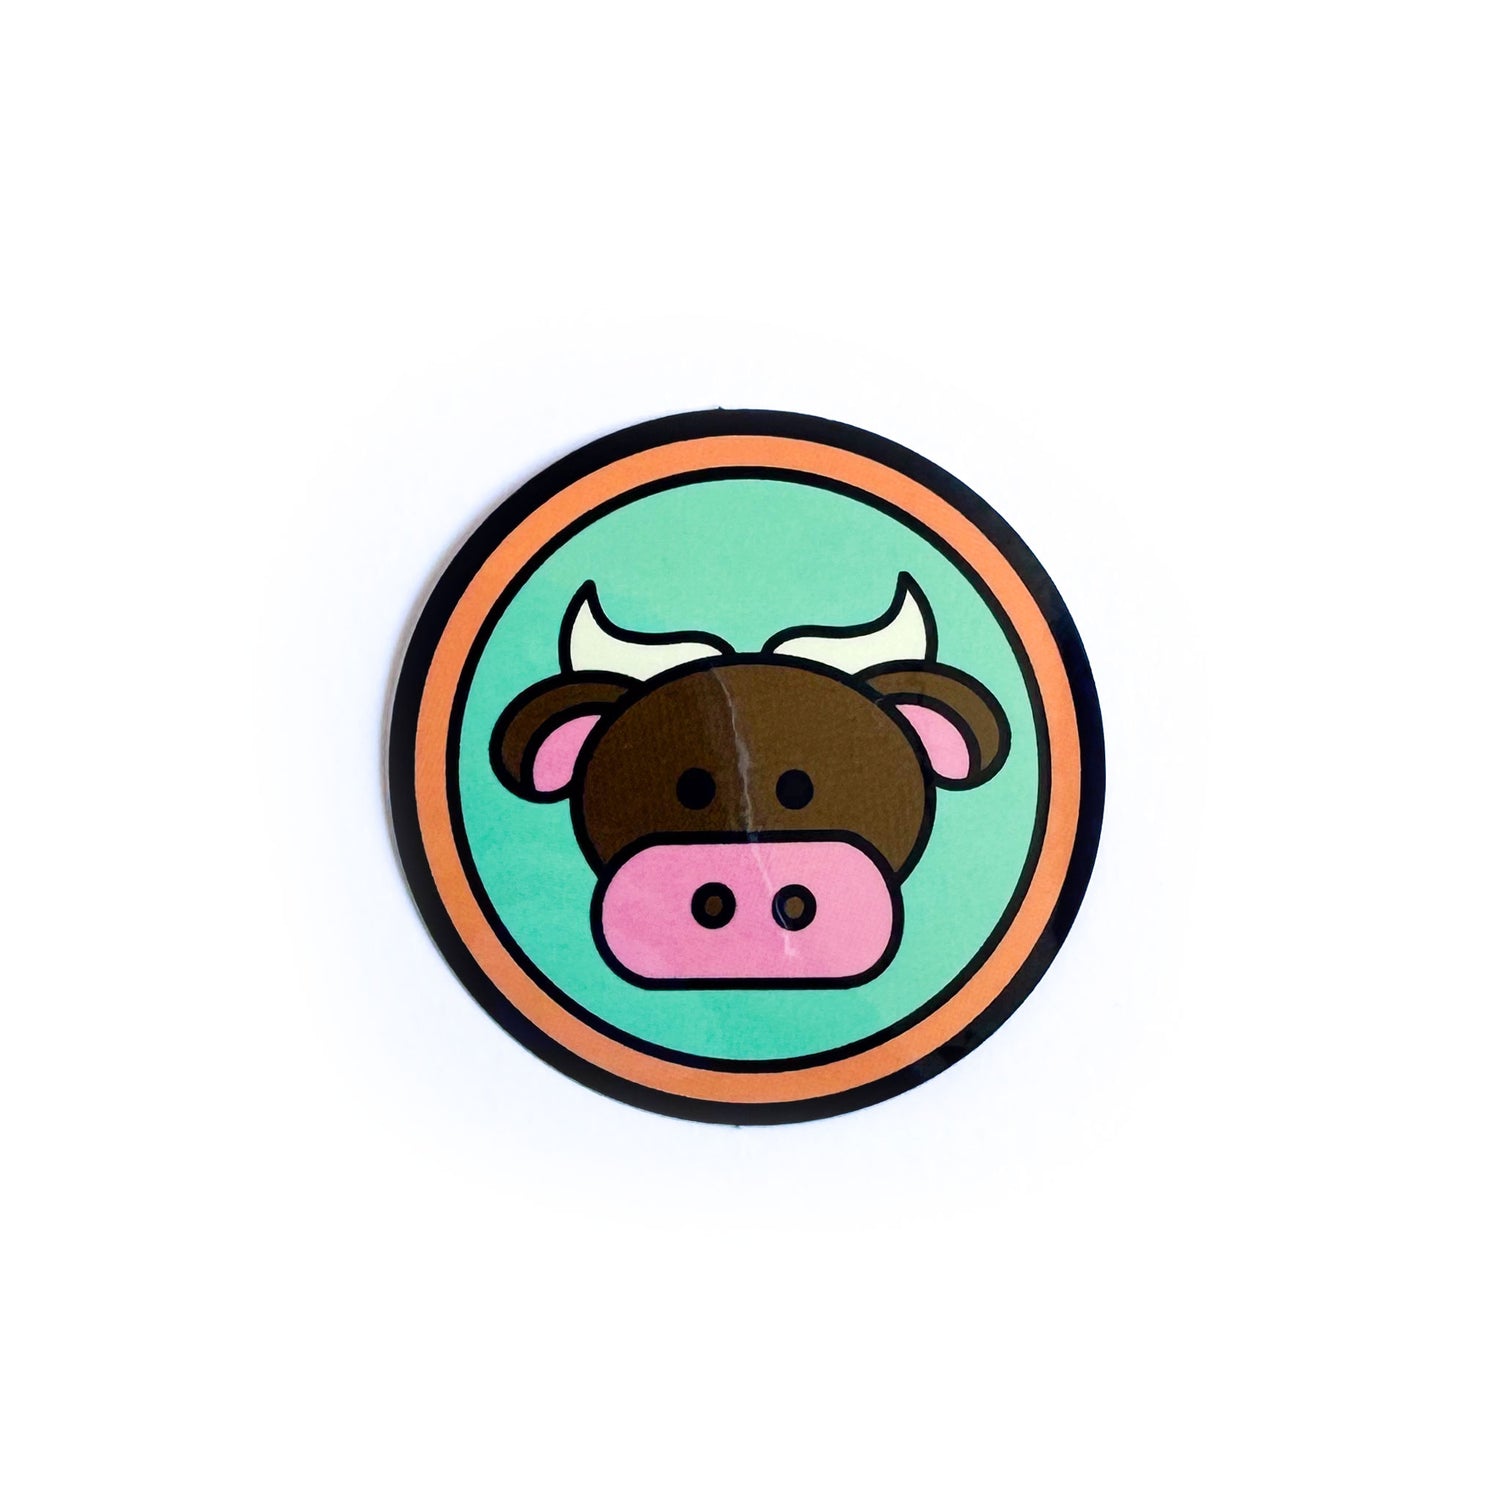 A circle sticker with a cute illustration of a bull on it to represent the Taurus zodiac sign. 